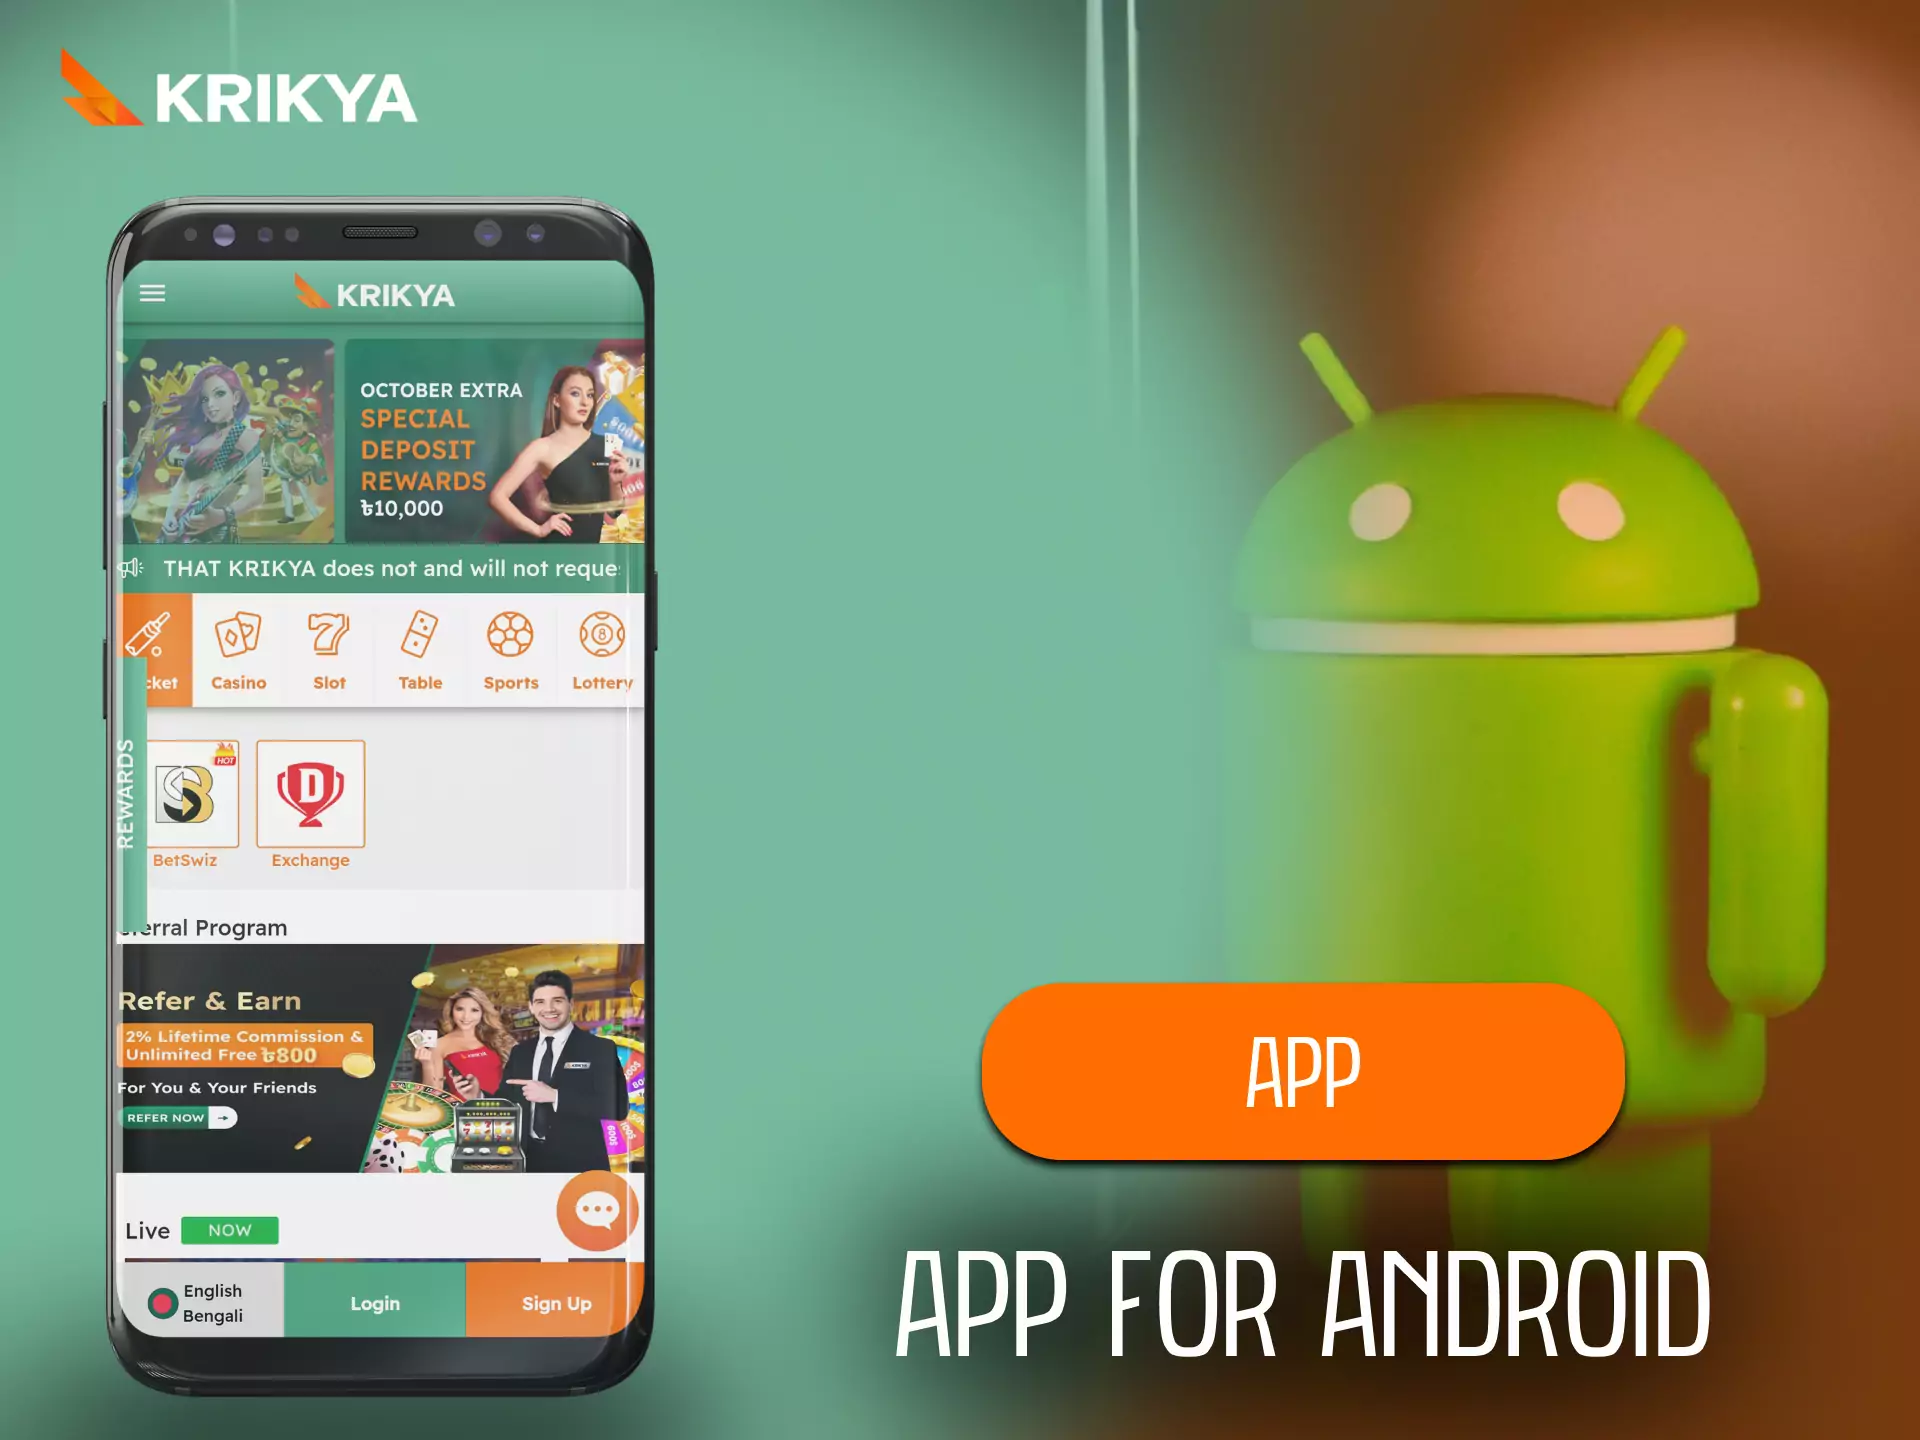 Krikya has a handy application for Android device users.